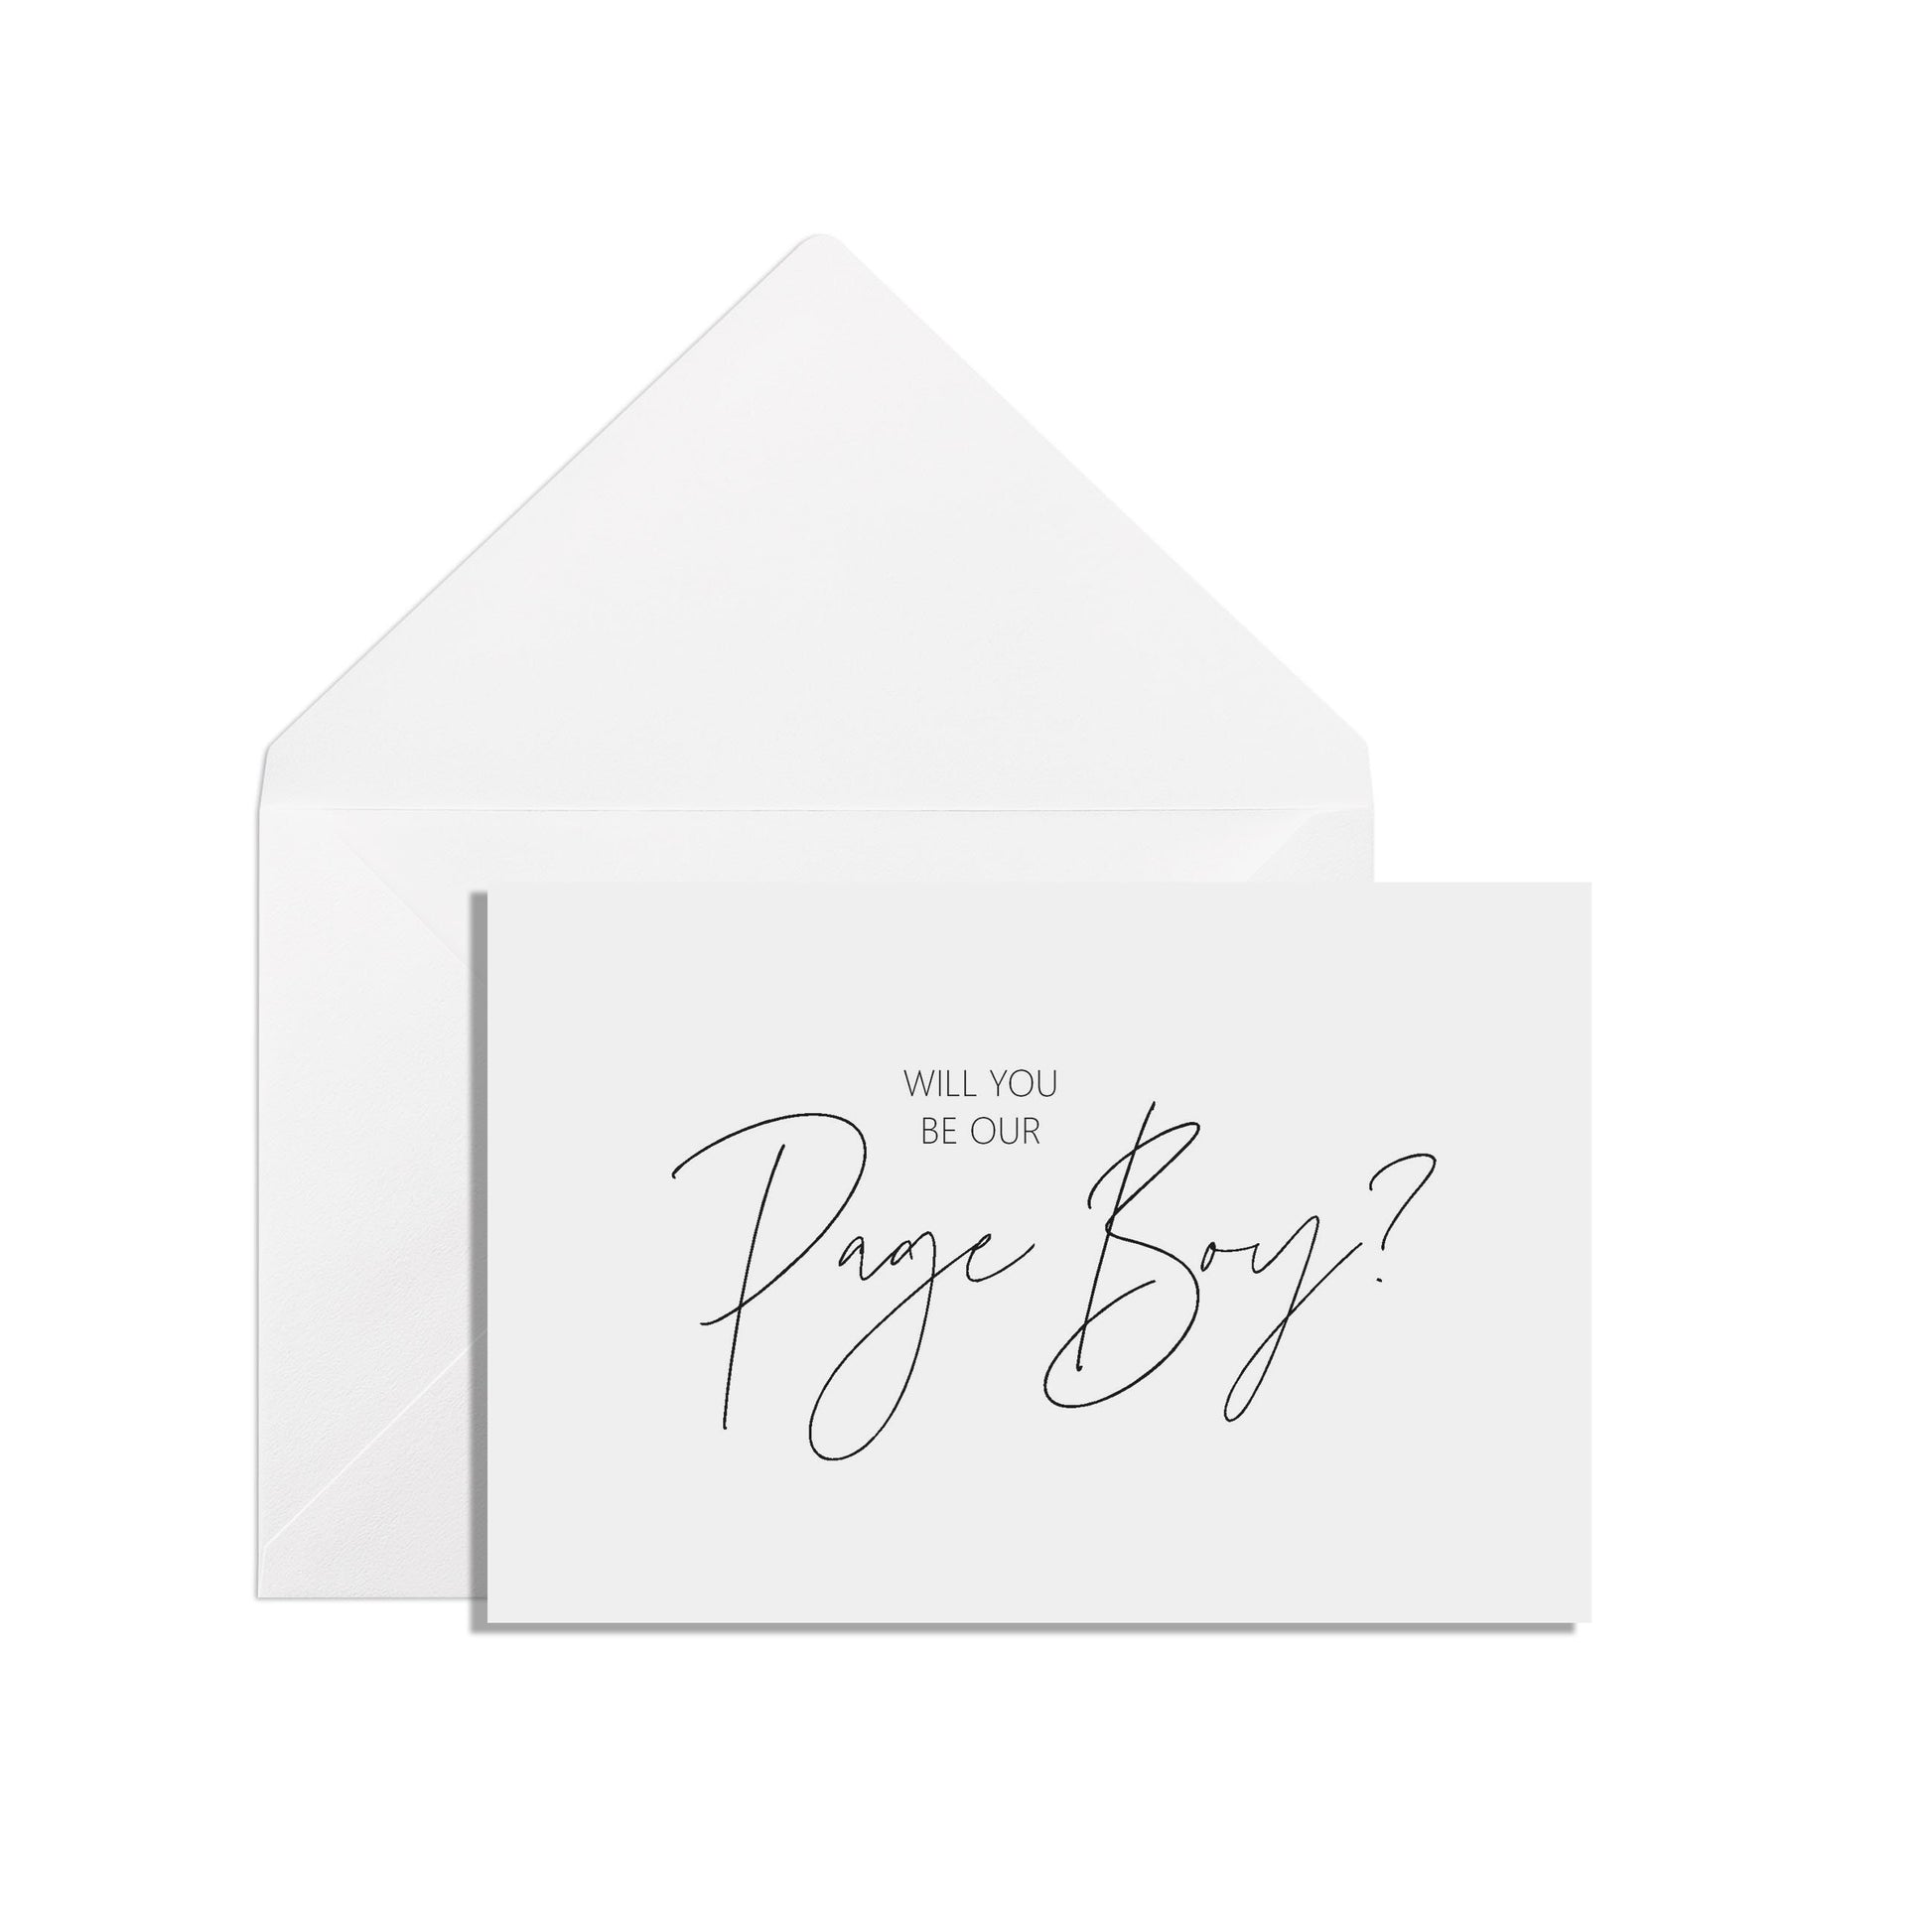 Will You Be Our Pageboy? A6 Black & White Proposal Card With White Envelope